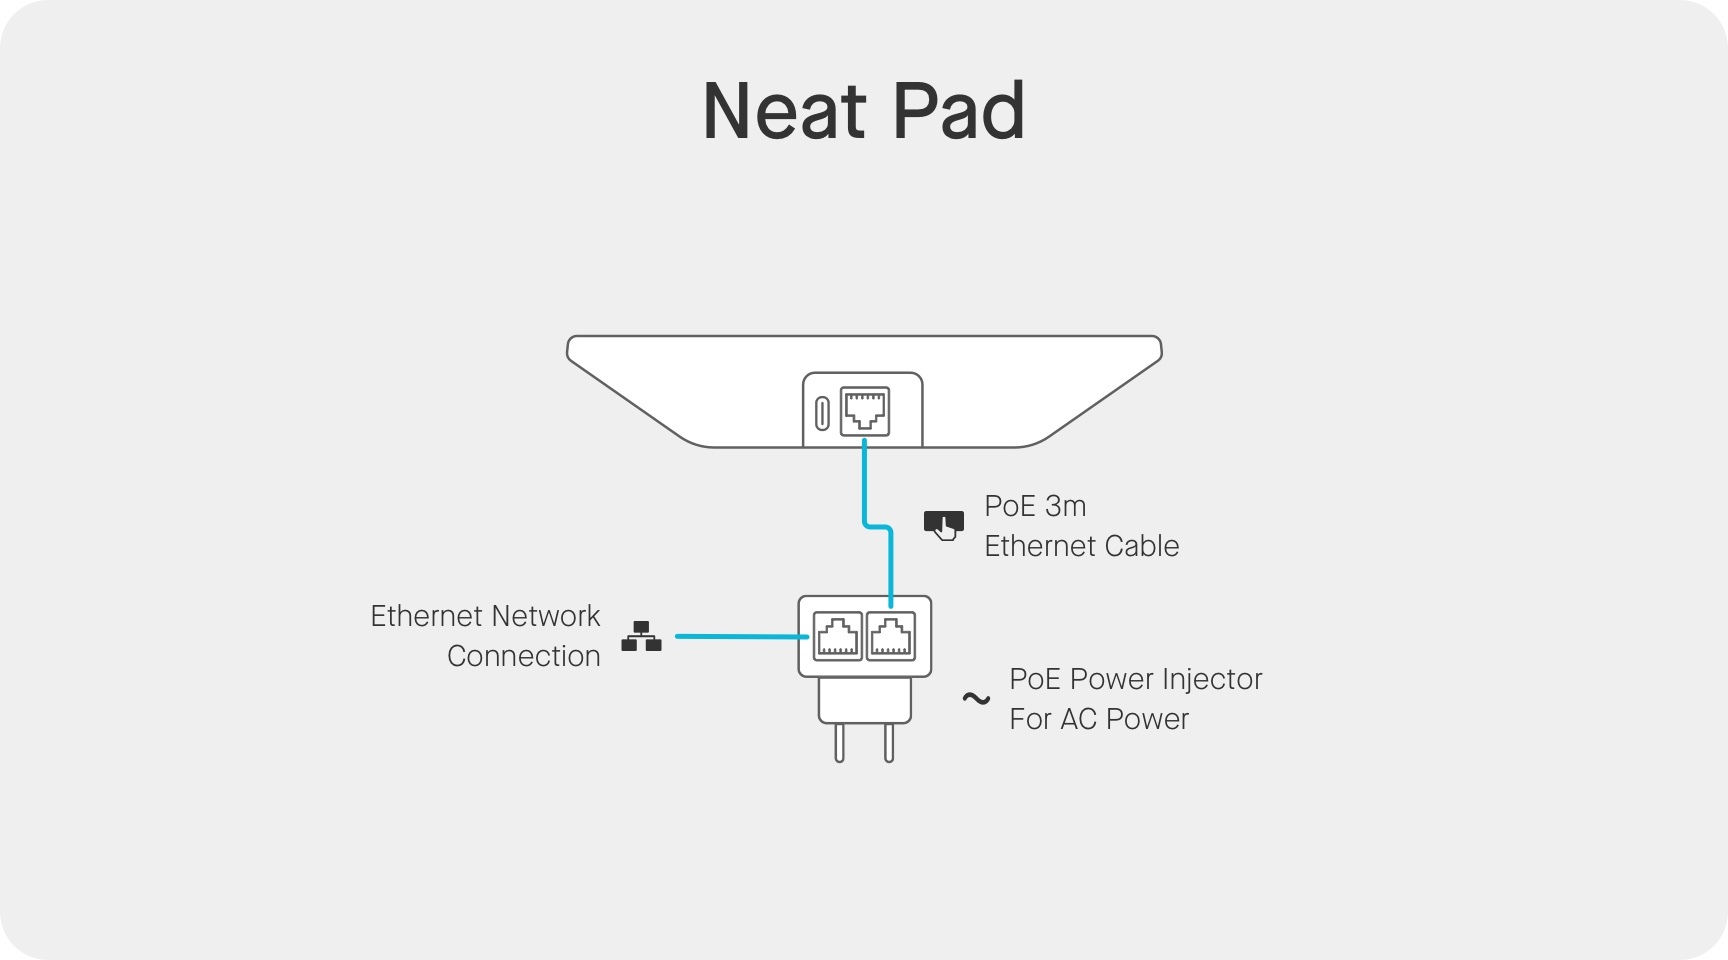 Neat Pad: Power over Ethernet (PoE) requirements